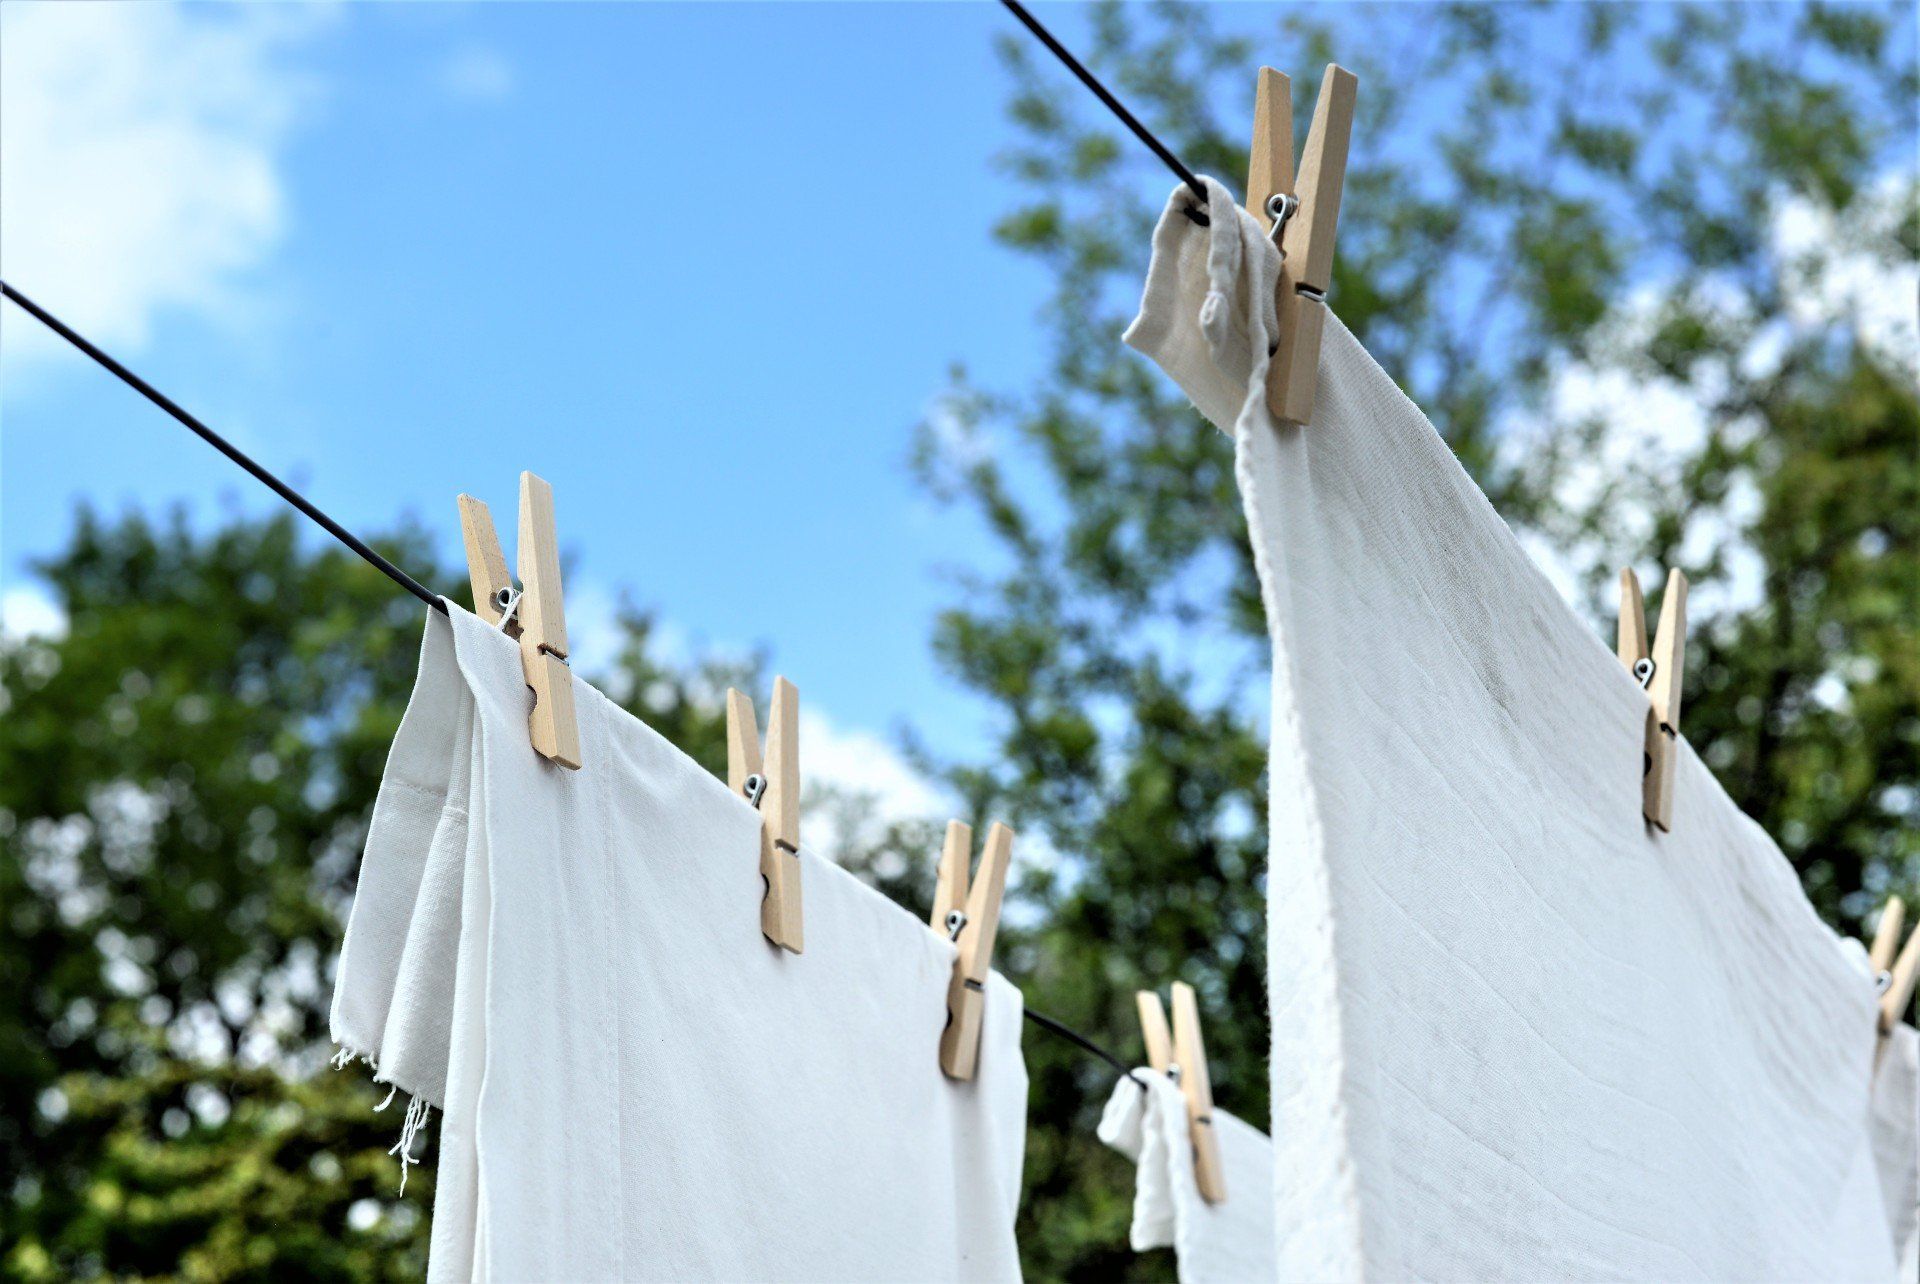 White sheets on a washing line.